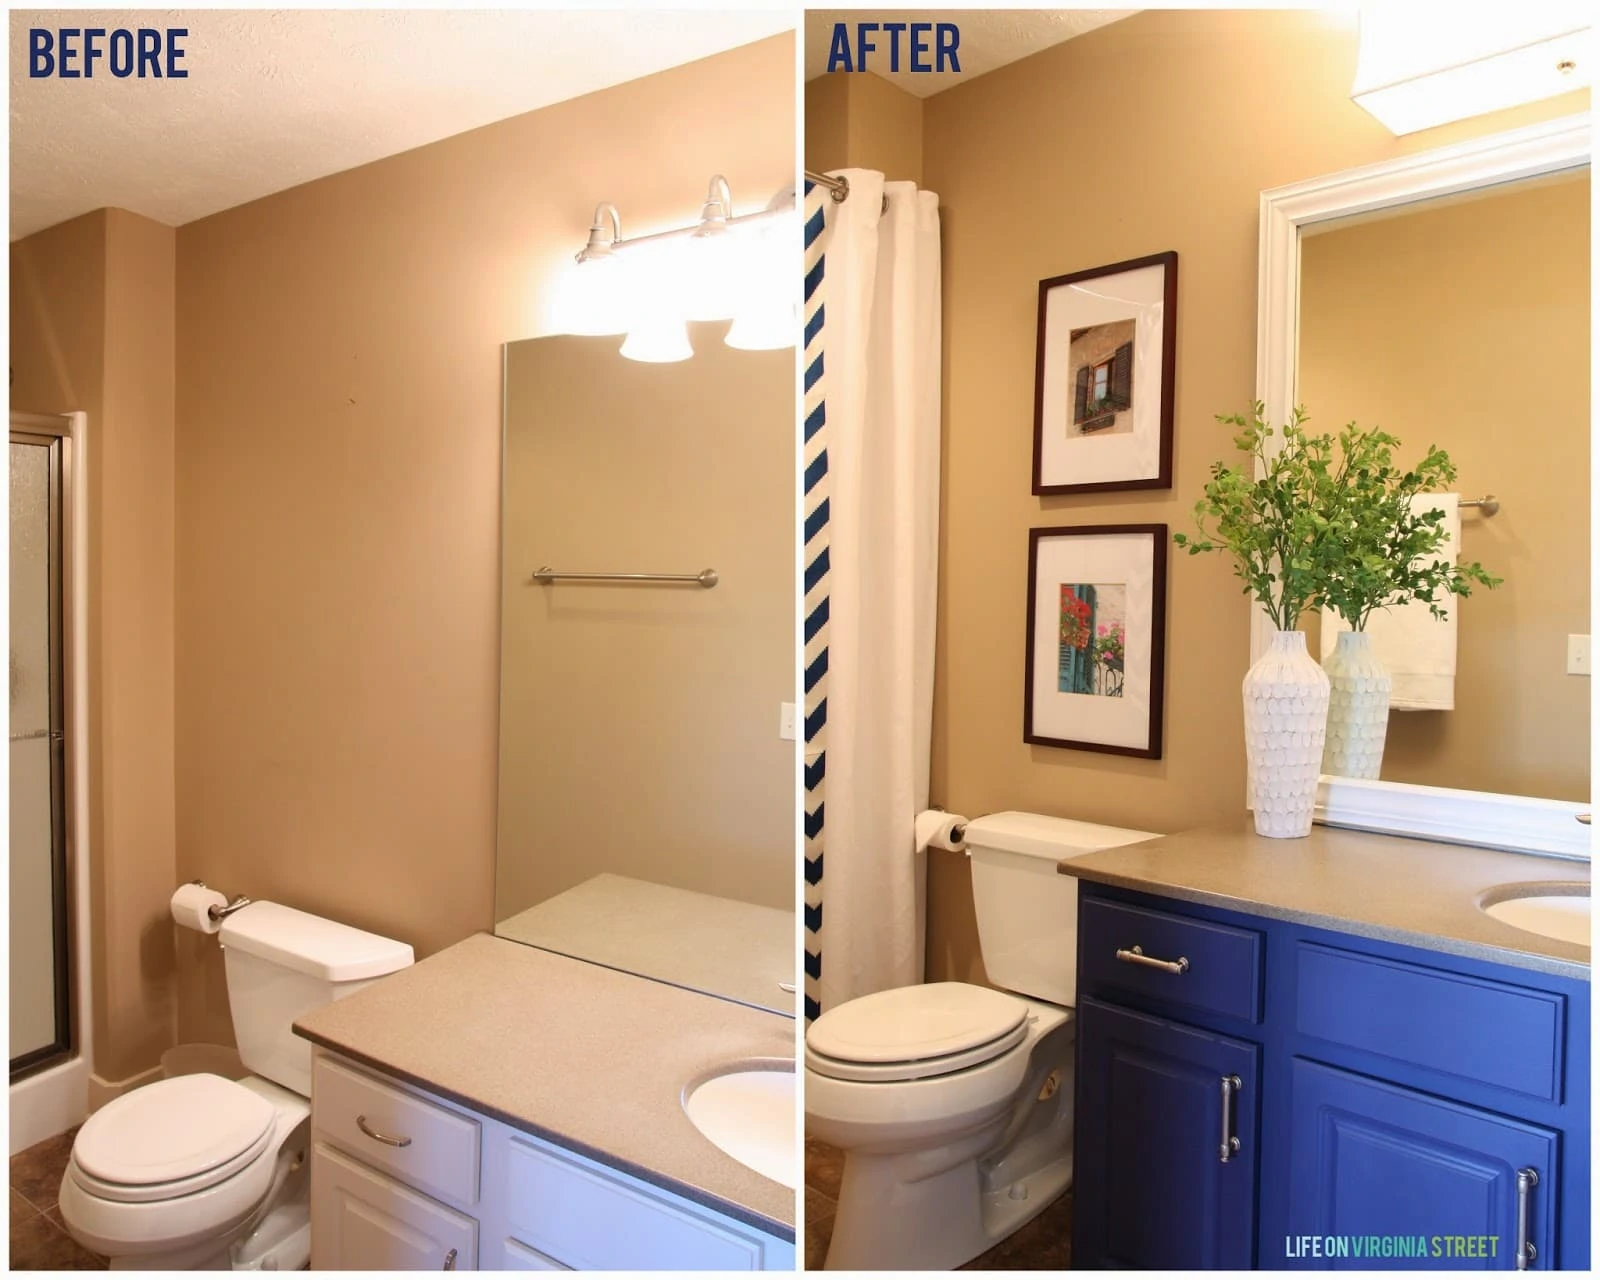 Guest bathroom before and after makeover shots. 